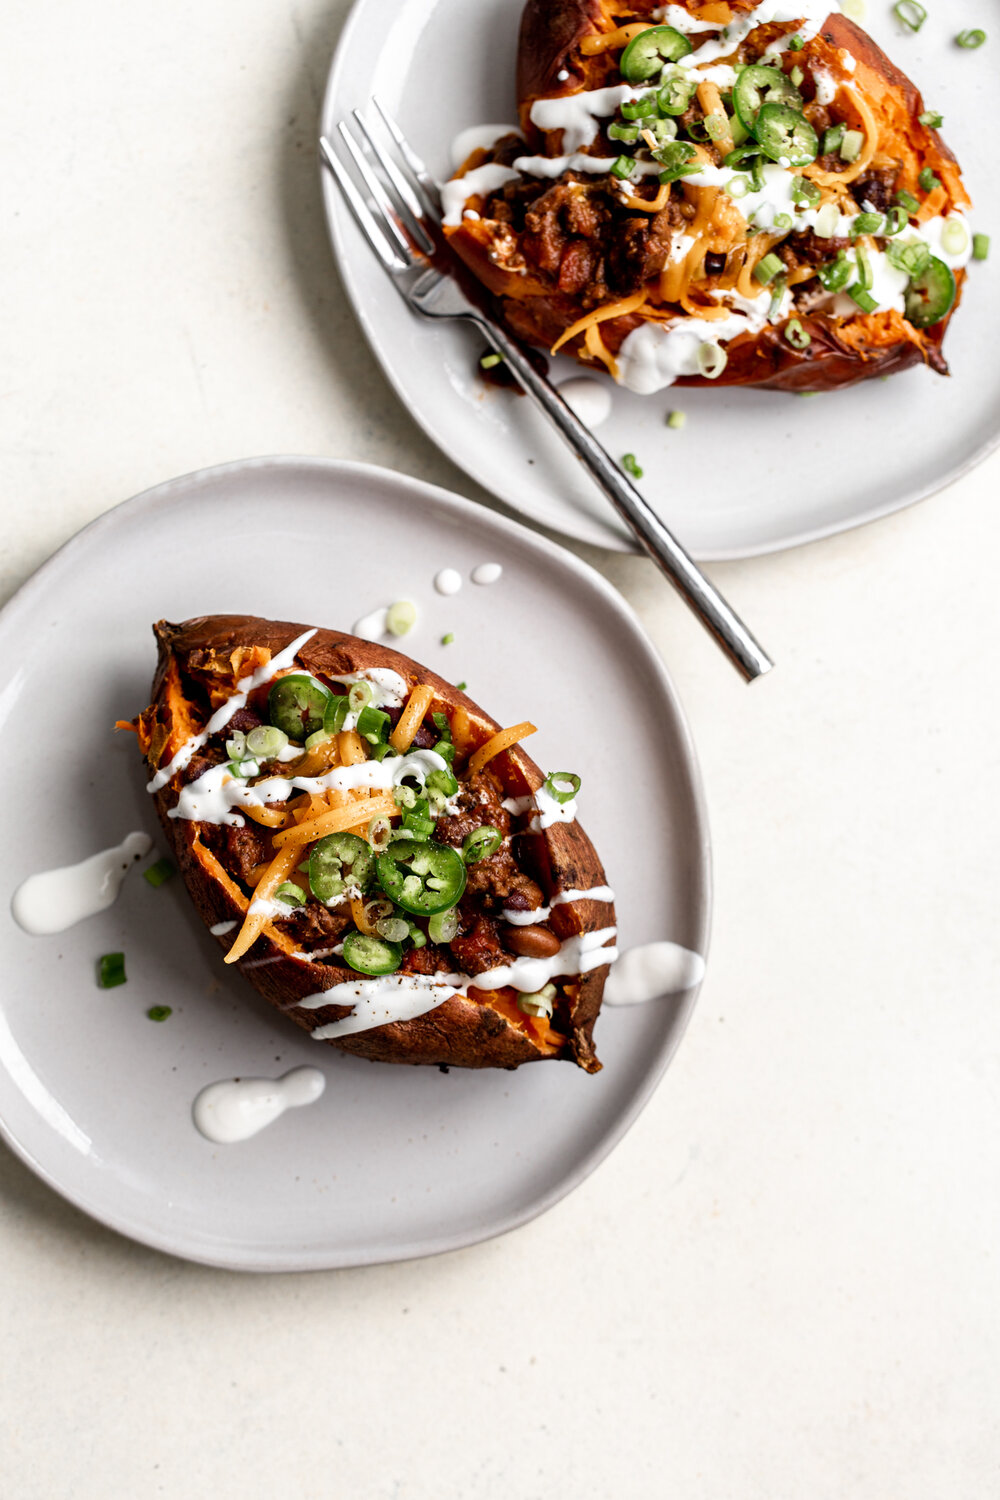 chili loaded baked sweet potatoes recipe on plate